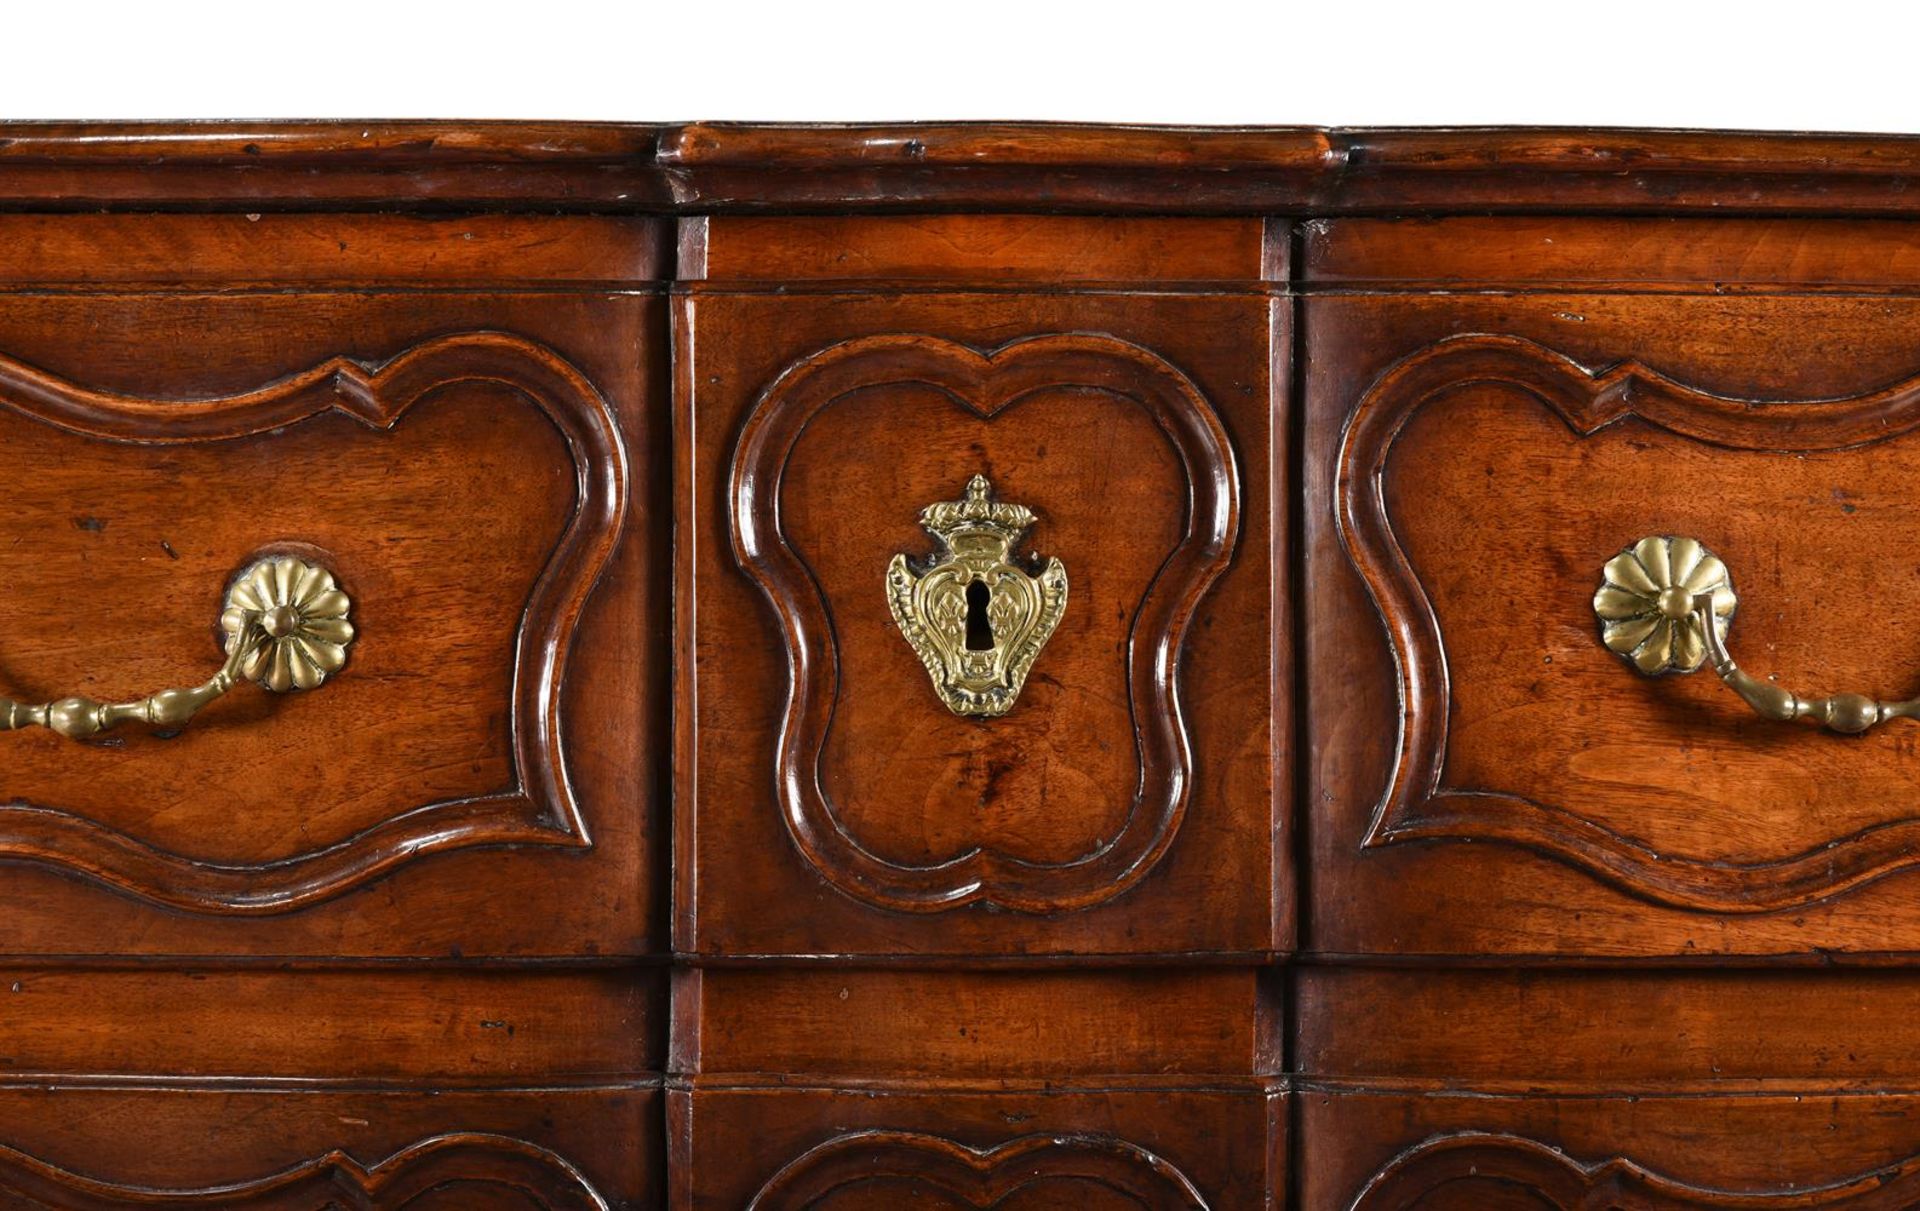 A LOUIS XV WALNUT COMMODE, SECOND HALF 18TH CENTURY - Image 3 of 4